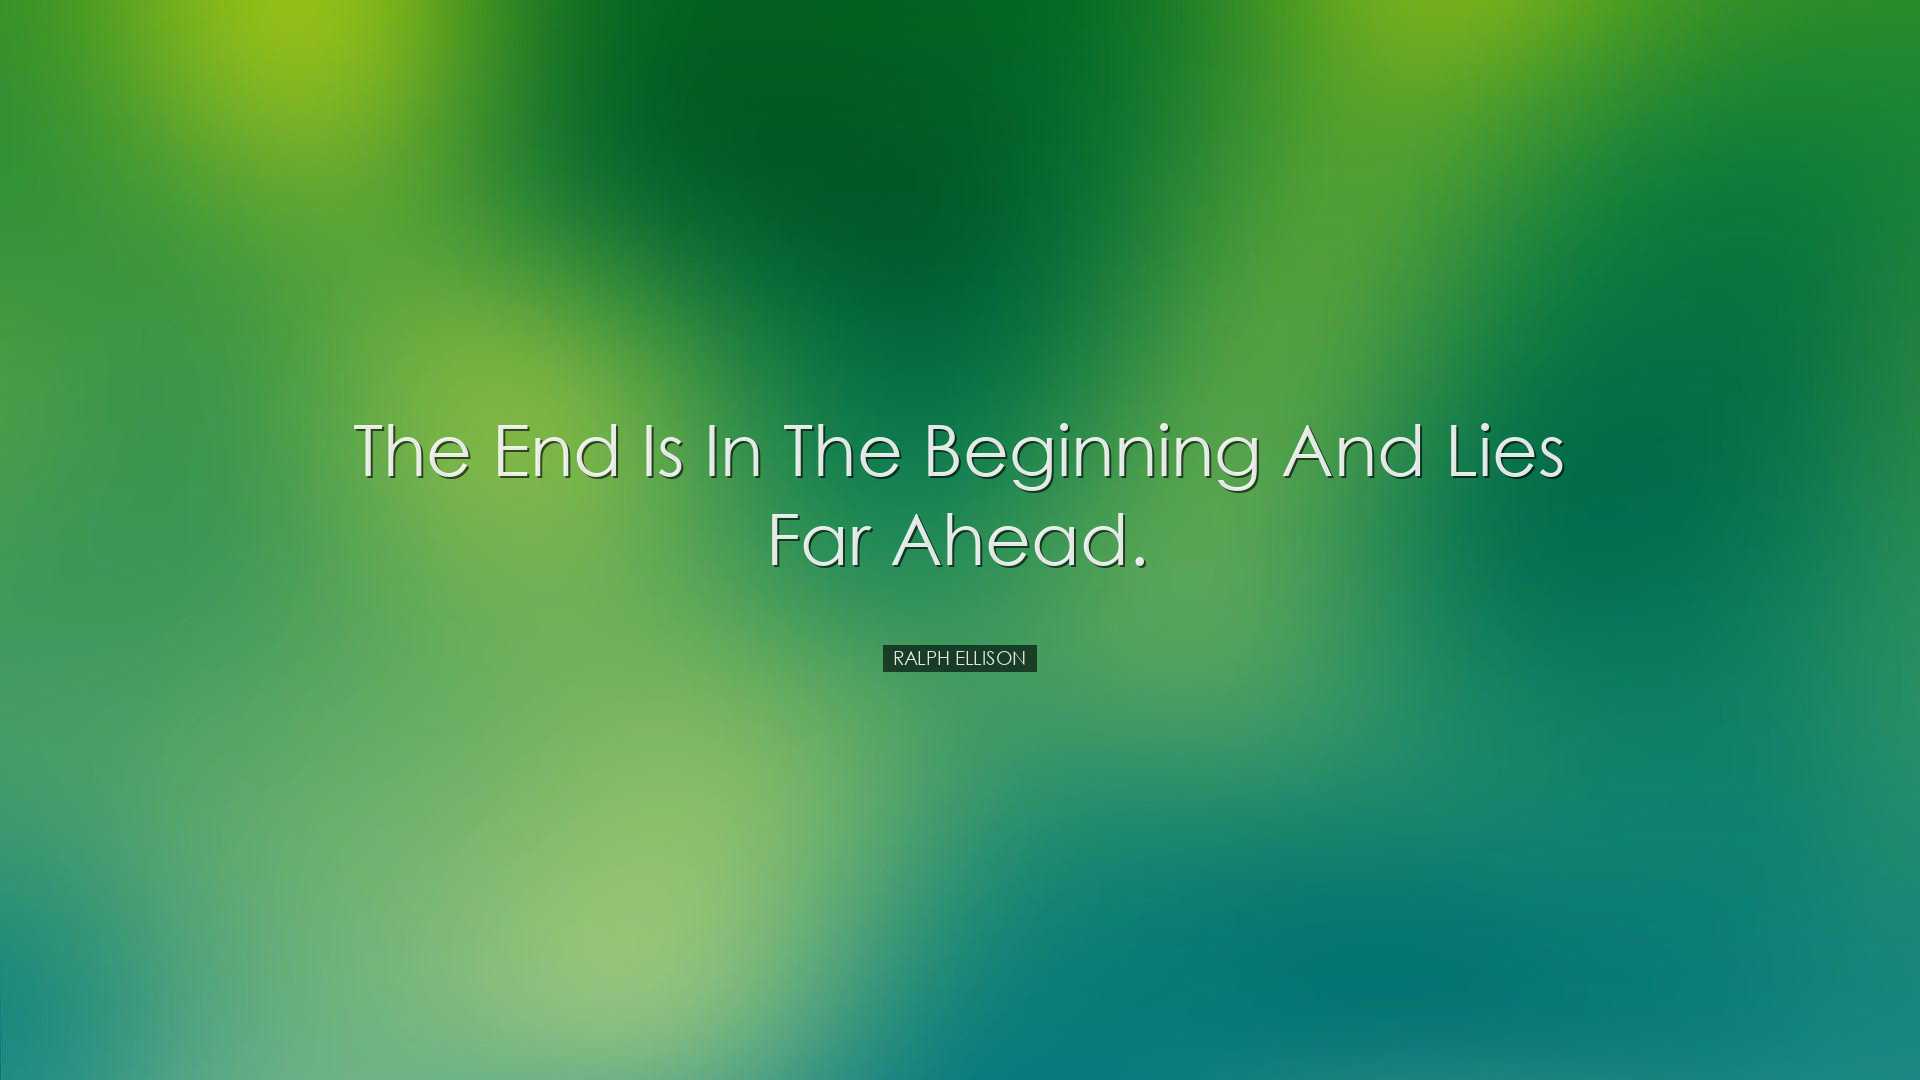 The end is in the beginning and lies far ahead. - Ralph Ellison